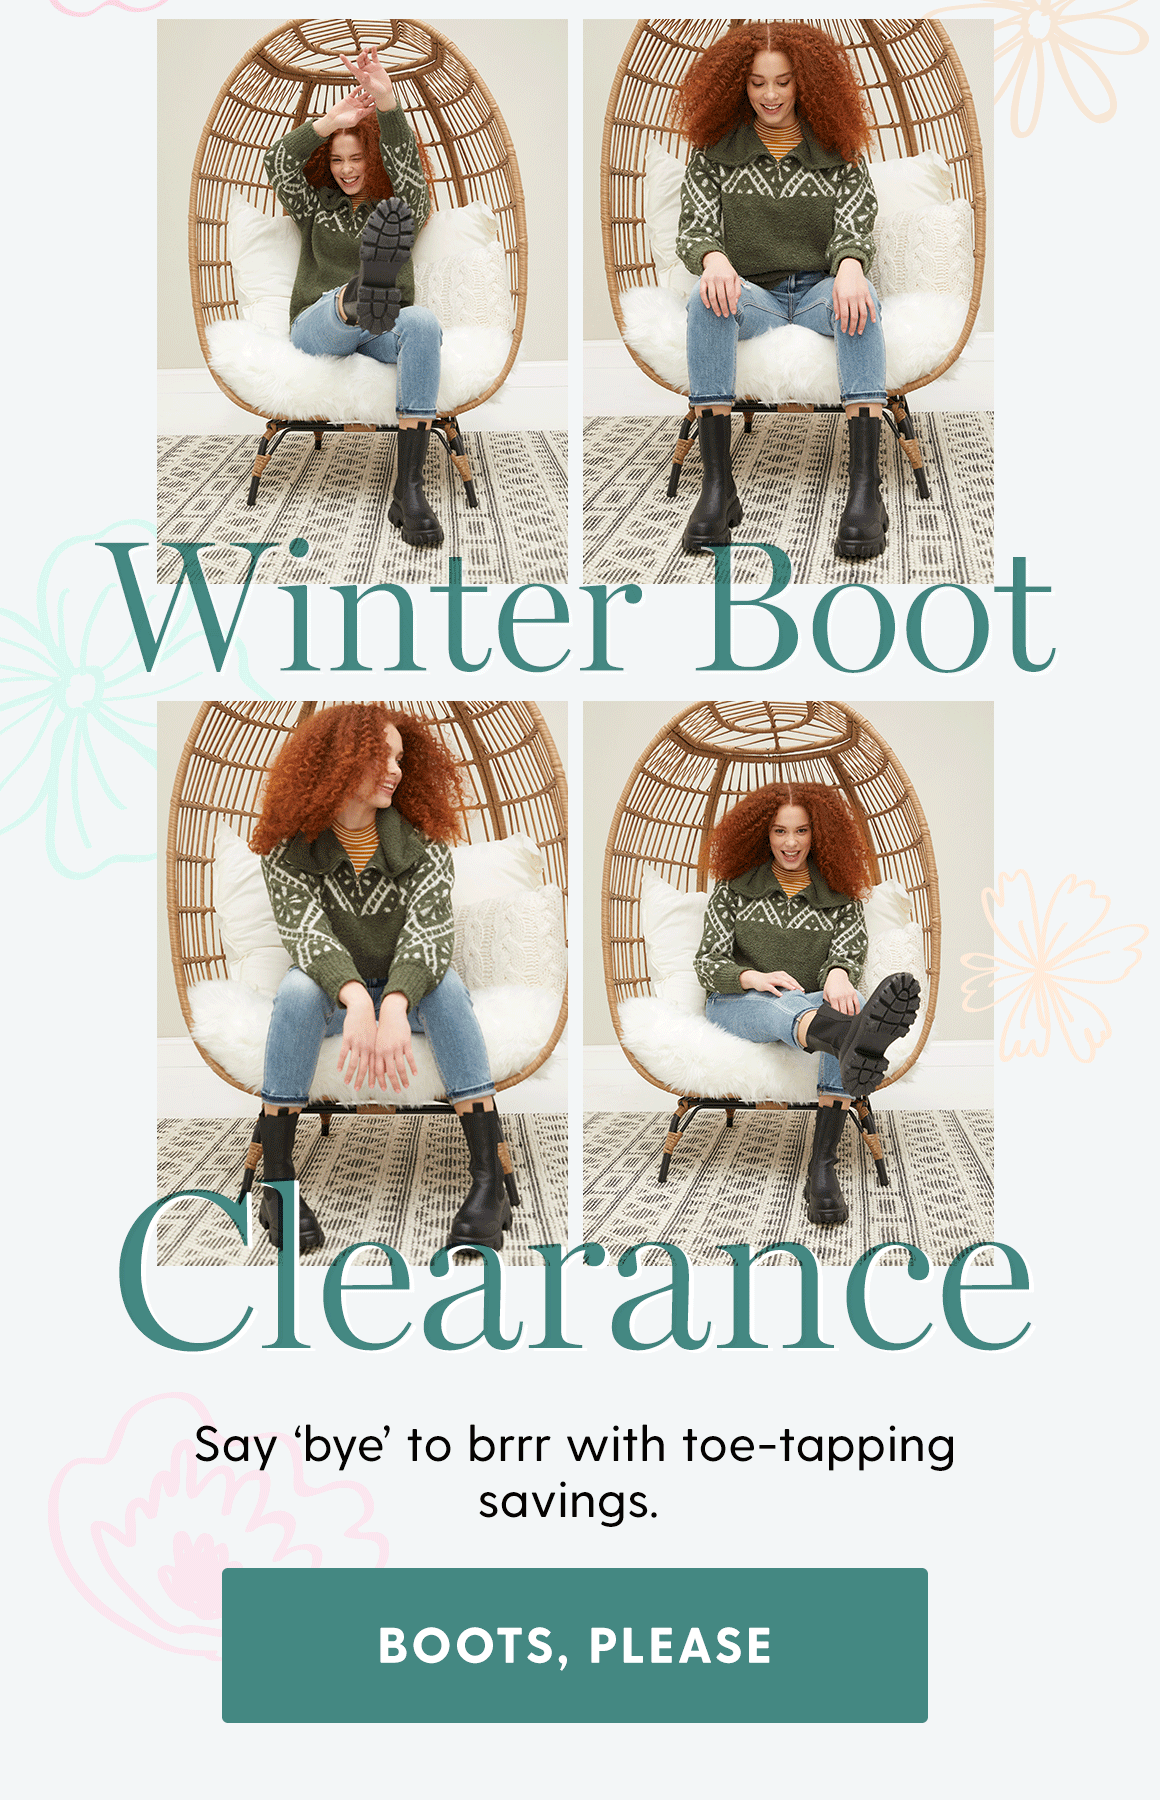 Winter Boot. Clearance. Say bye to brrr with toe-tapping savings. BOOTS, PLEASE.